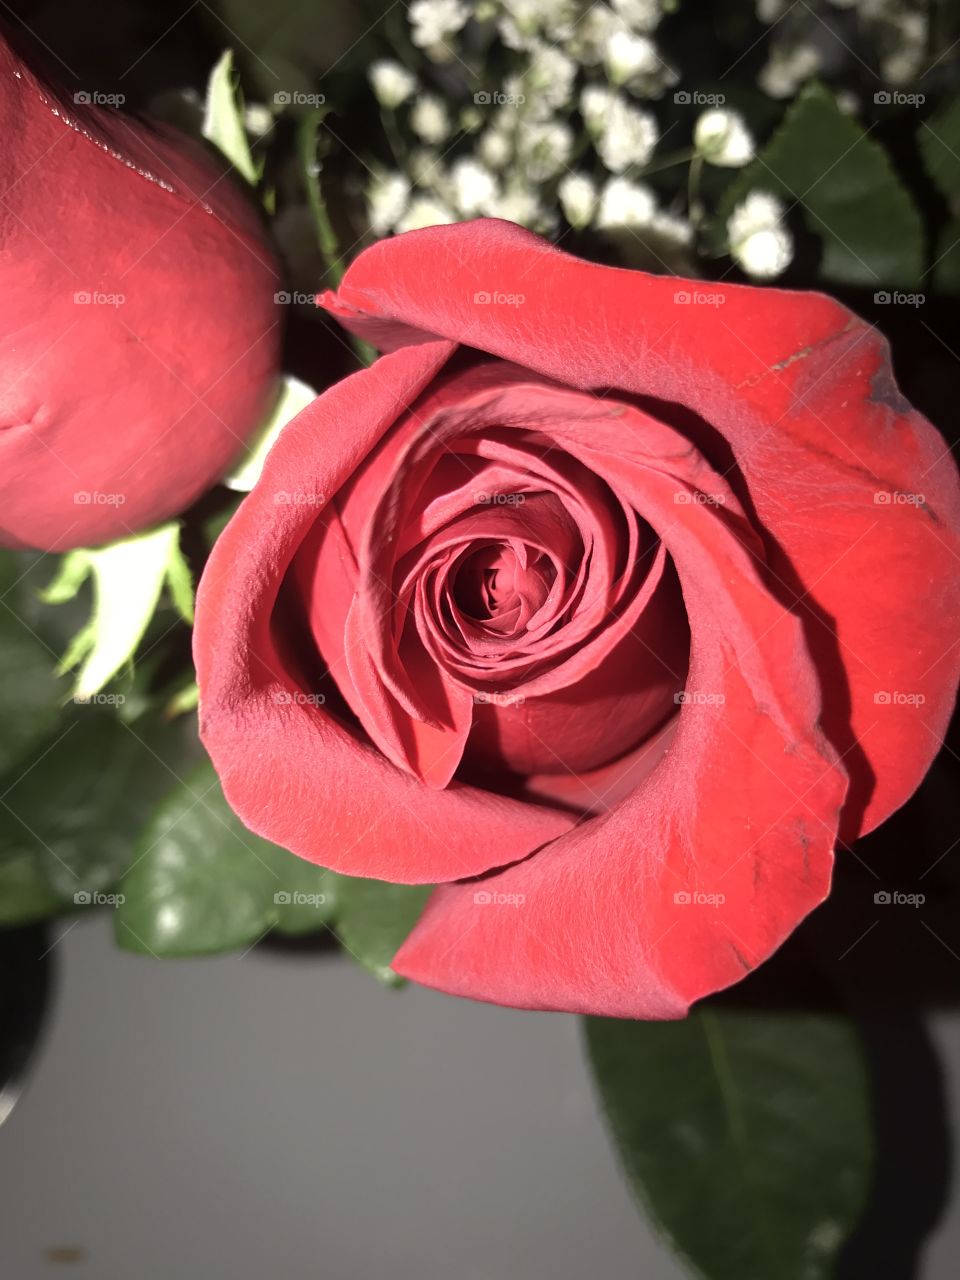 Every delicate petal makes a beautiful red rose